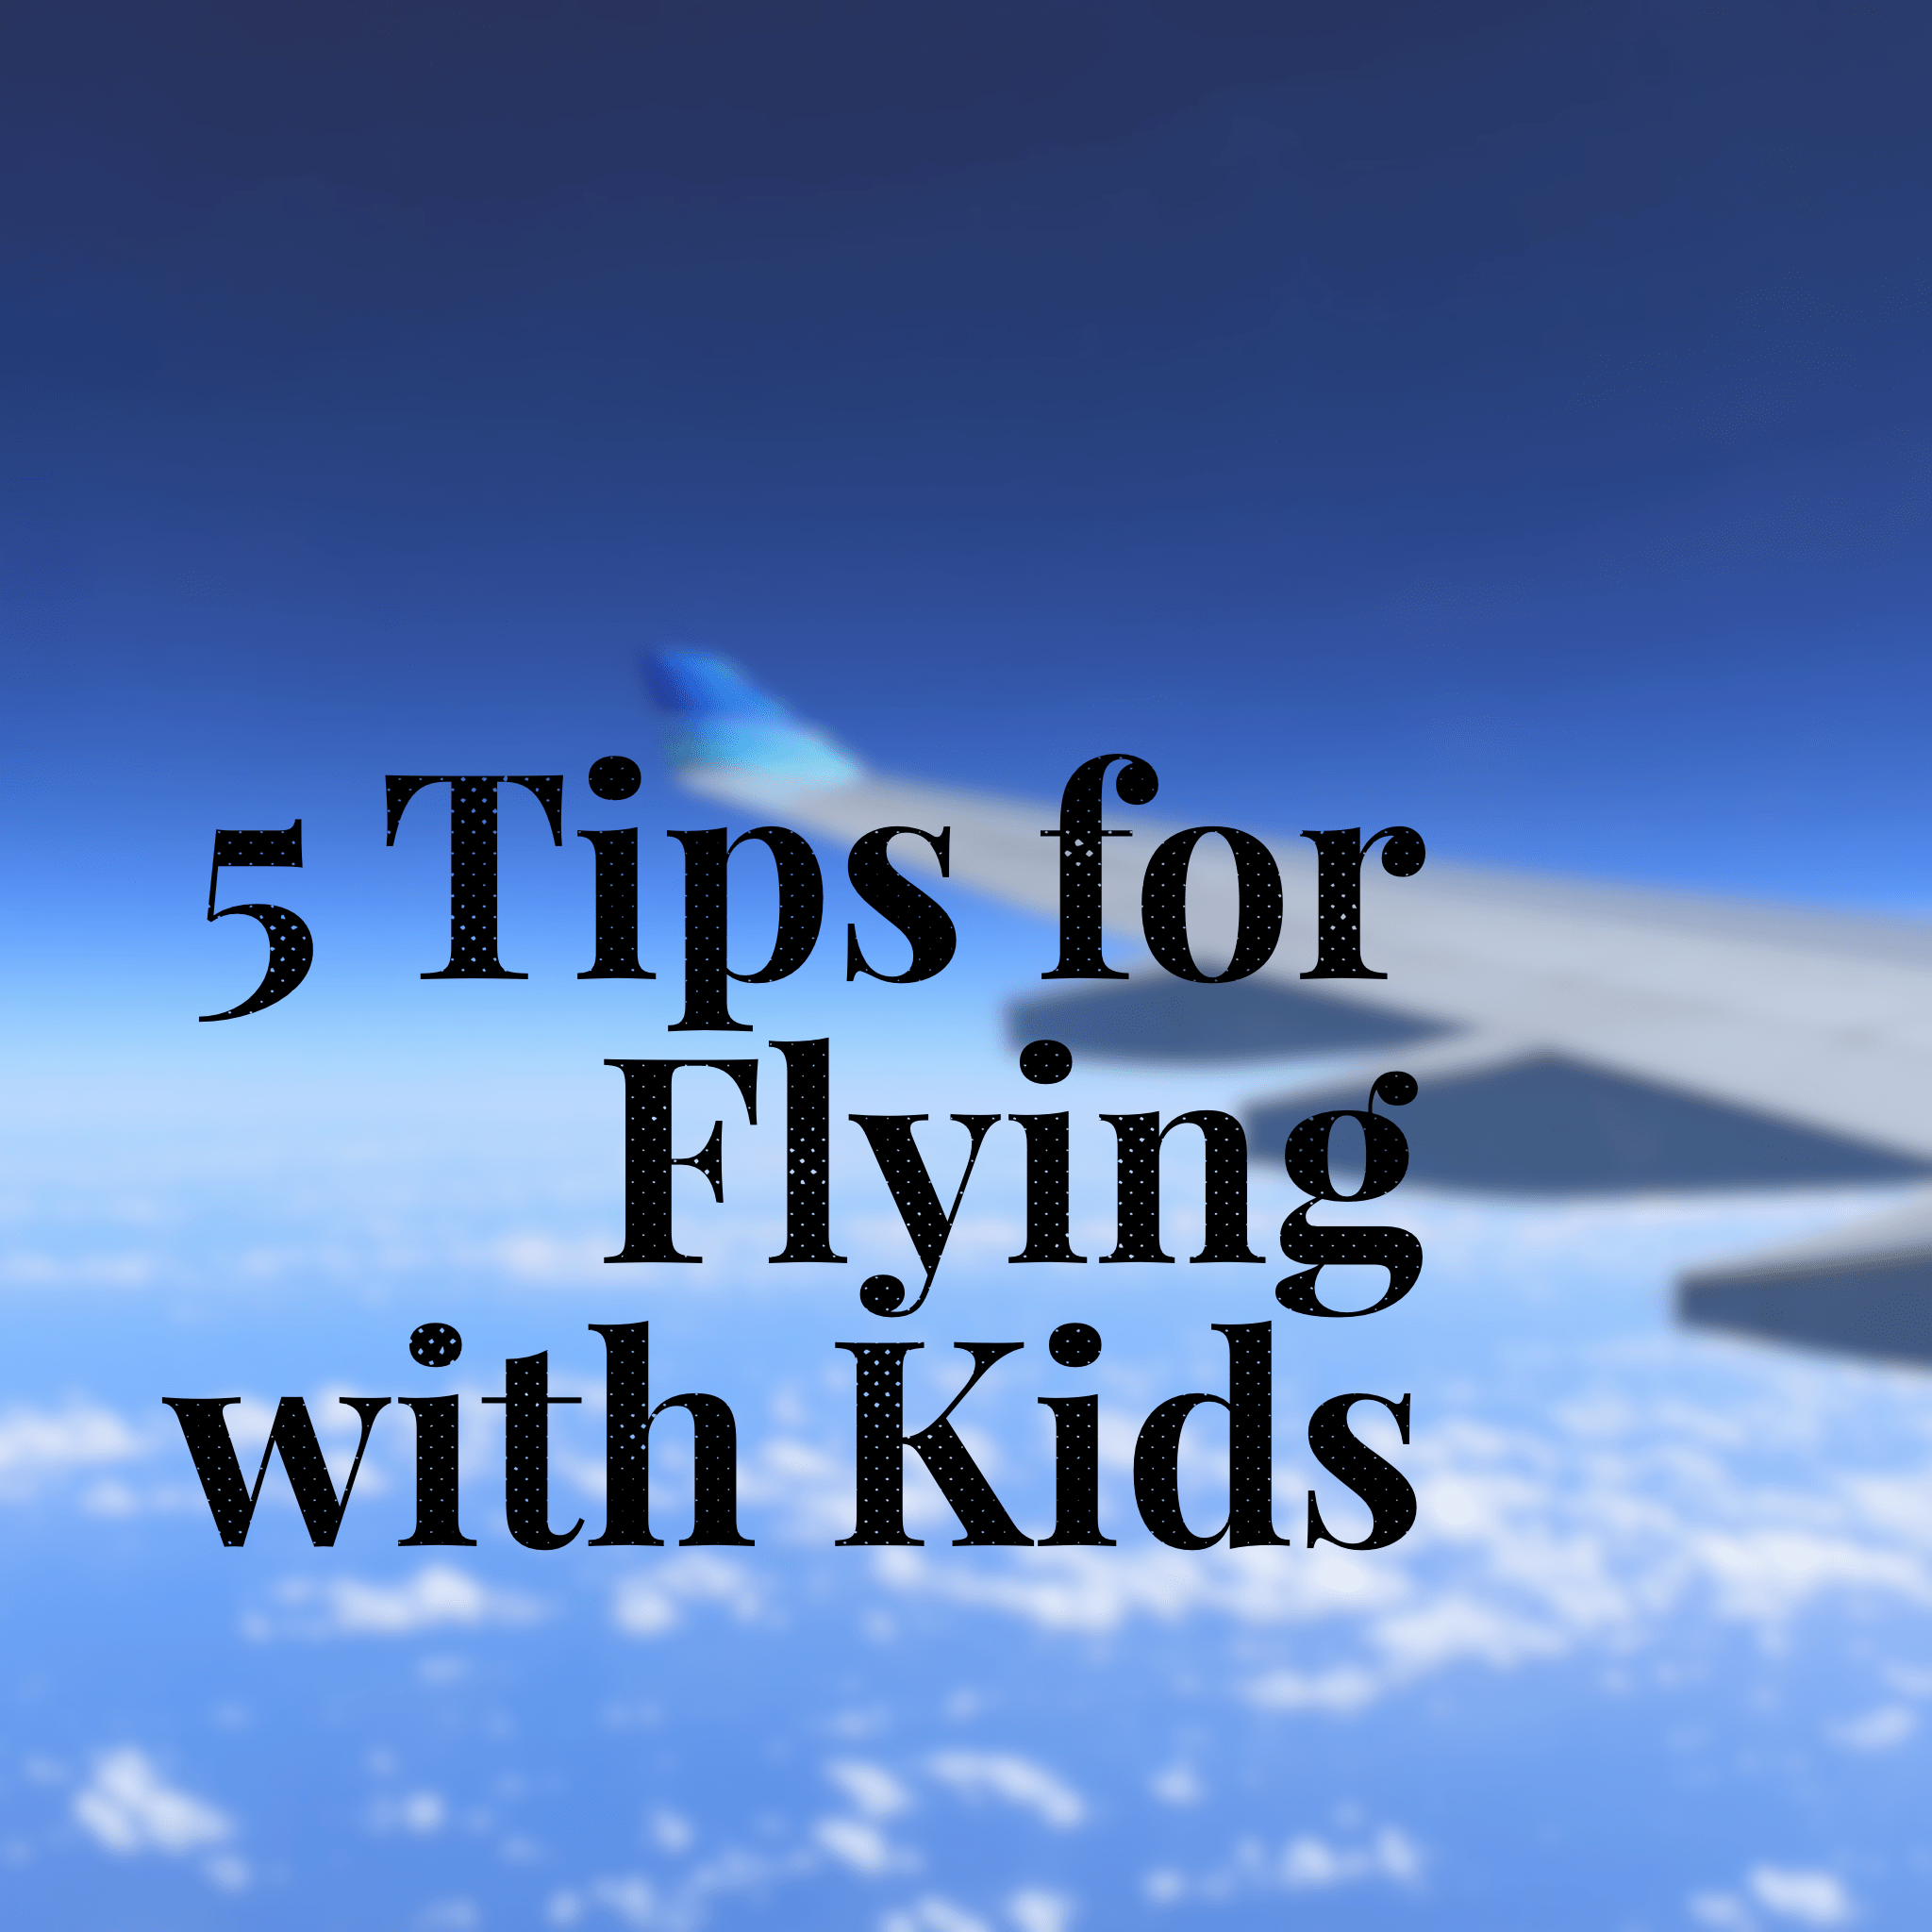 These 5 tips for flying with kids will make airplane travel much easier on both you and your kids. With a bit of preparation it will be smooth sailing!